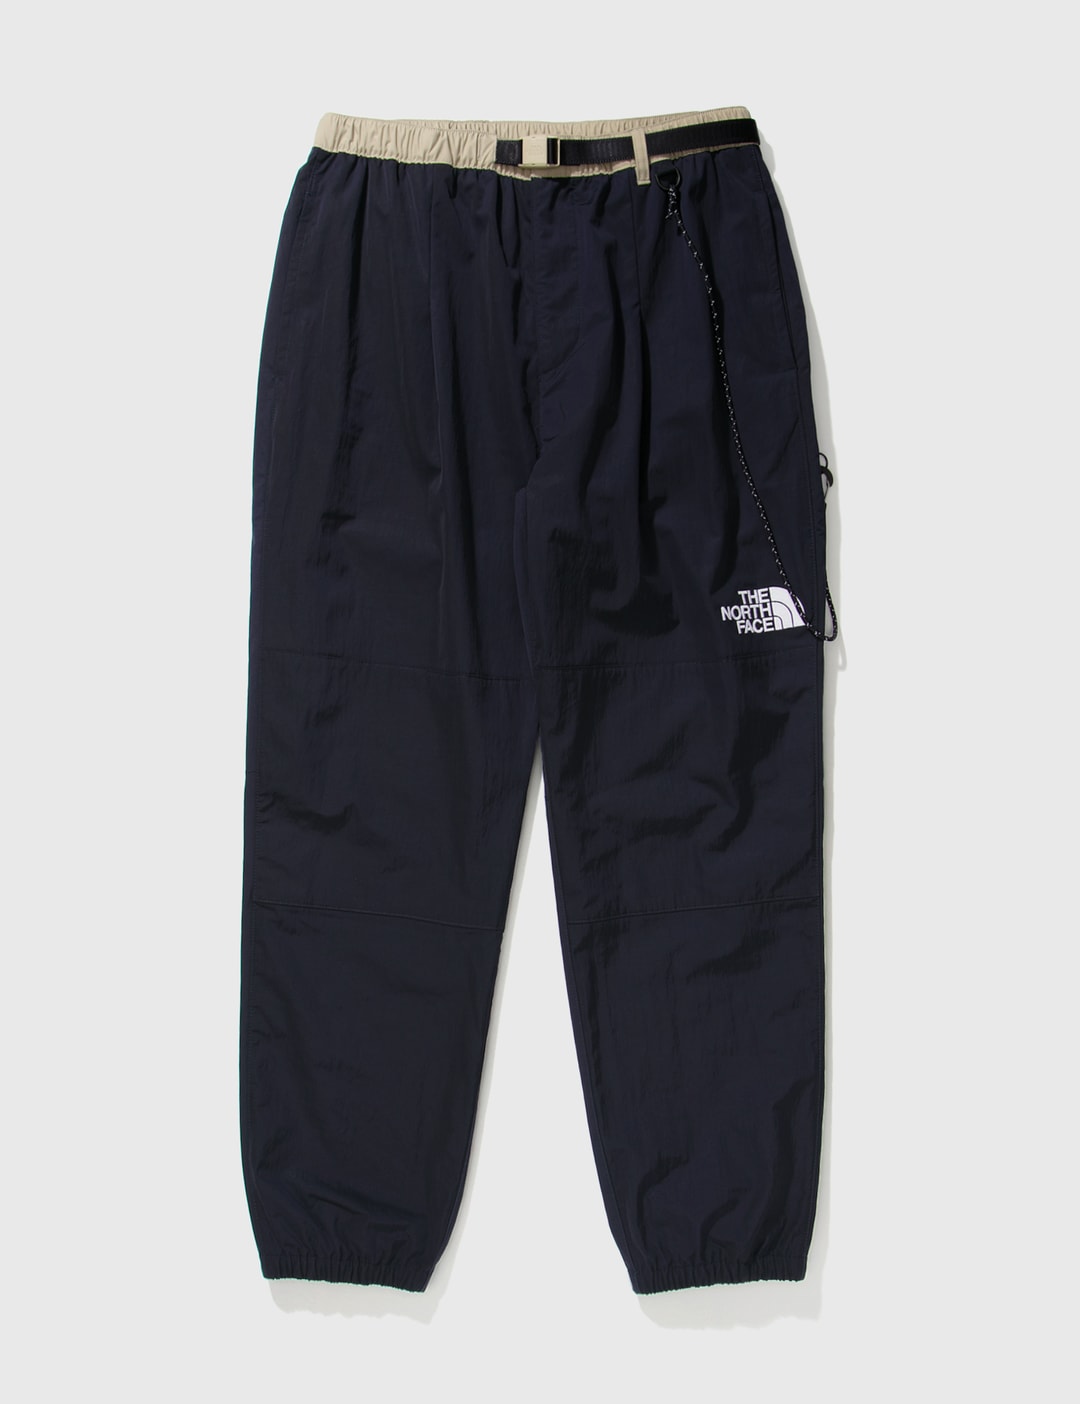 The North Face - D2 Utility Pants | HBX - Globally Curated Fashion and ...